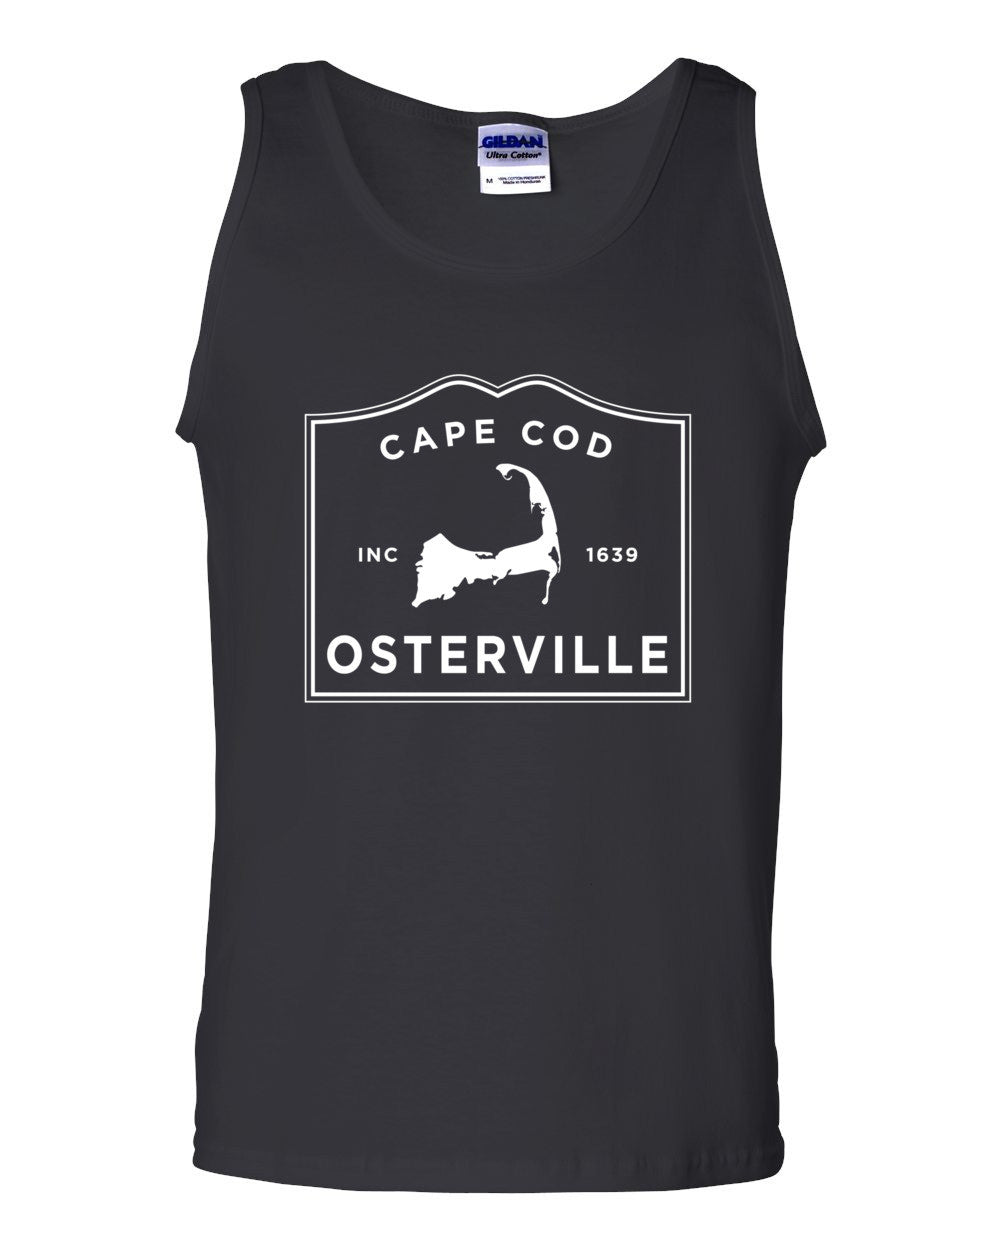 Osterville Cape Cod Tank Top